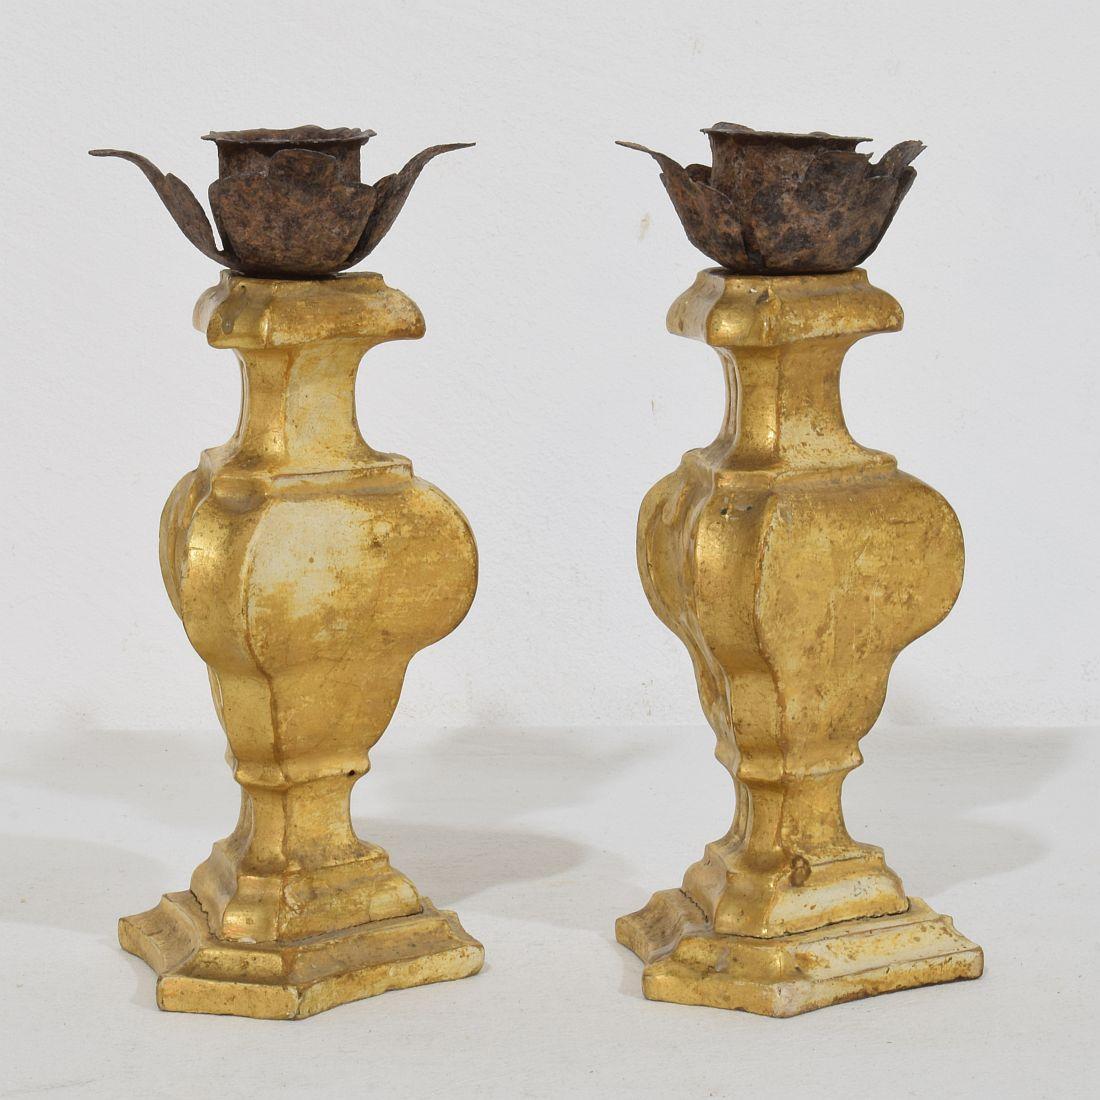 Couple of Small Late 18th Century Italian Neoclassical Giltwood Candleholders For Sale 2